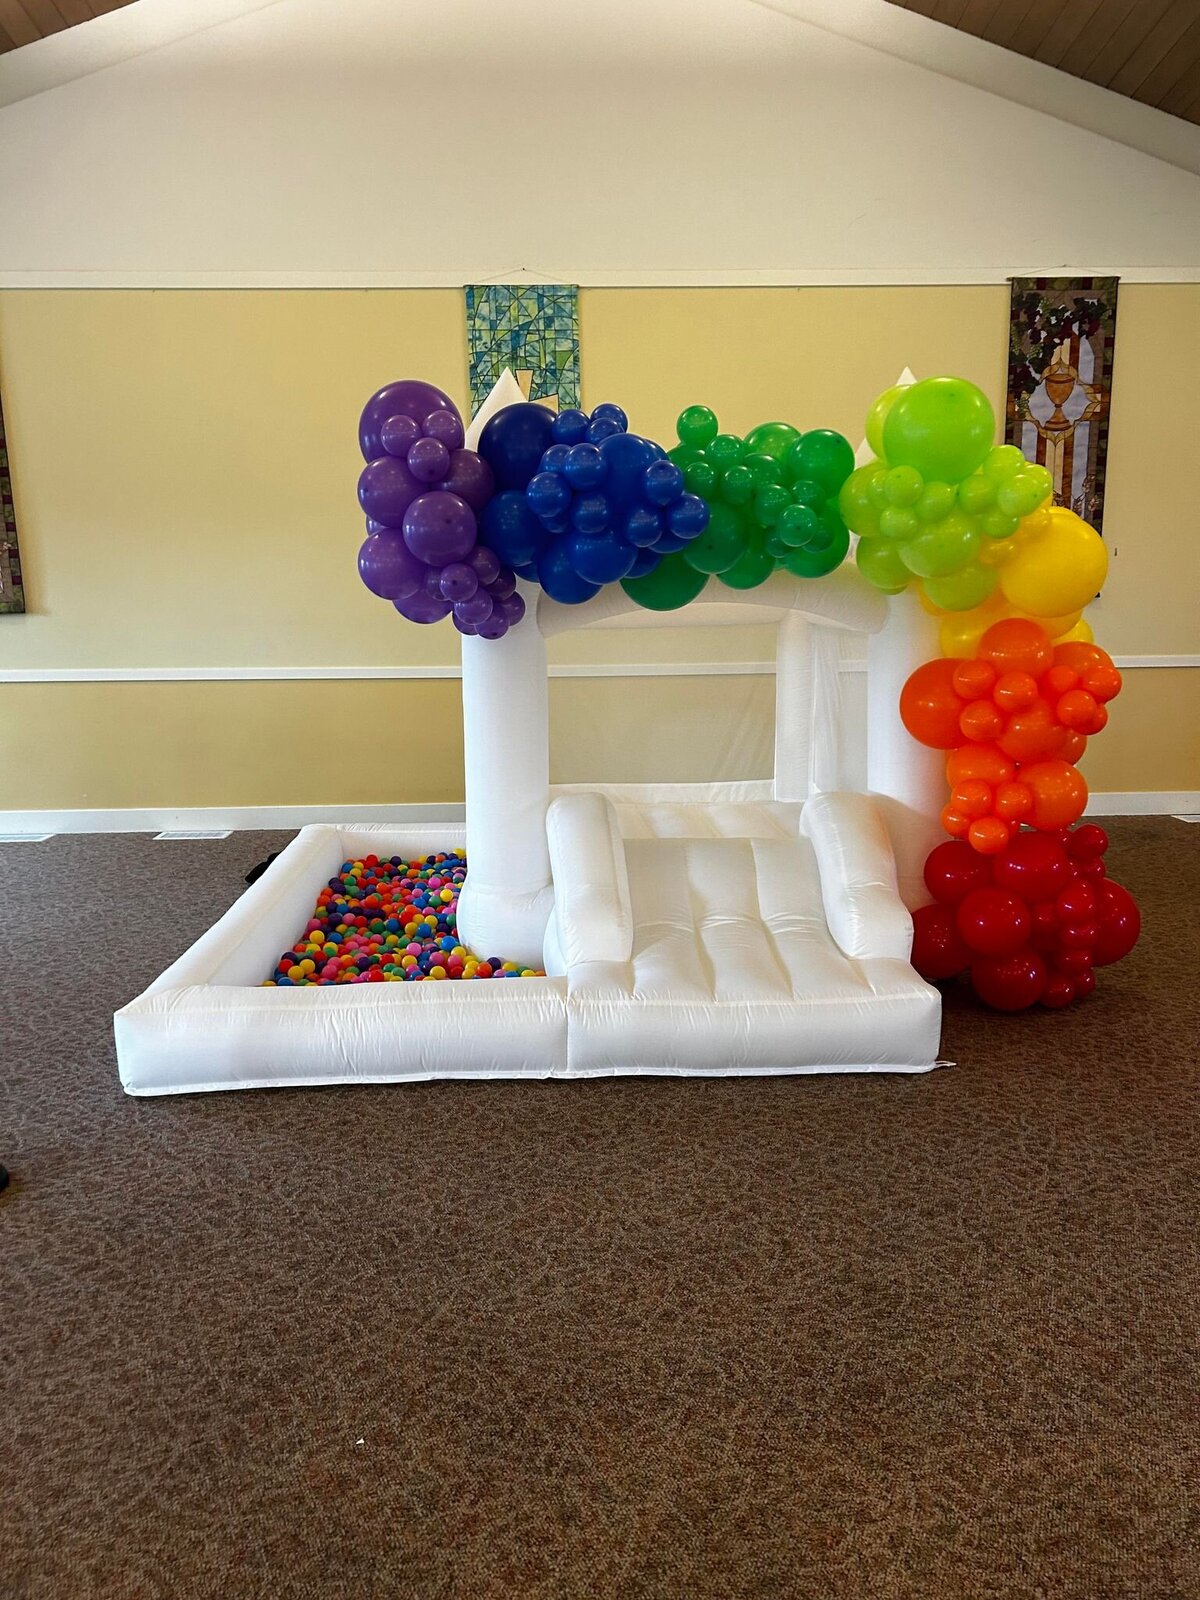 BOUNCE HOUSE INFLATABLE WITH RAINBOW BALLOON GARLAND